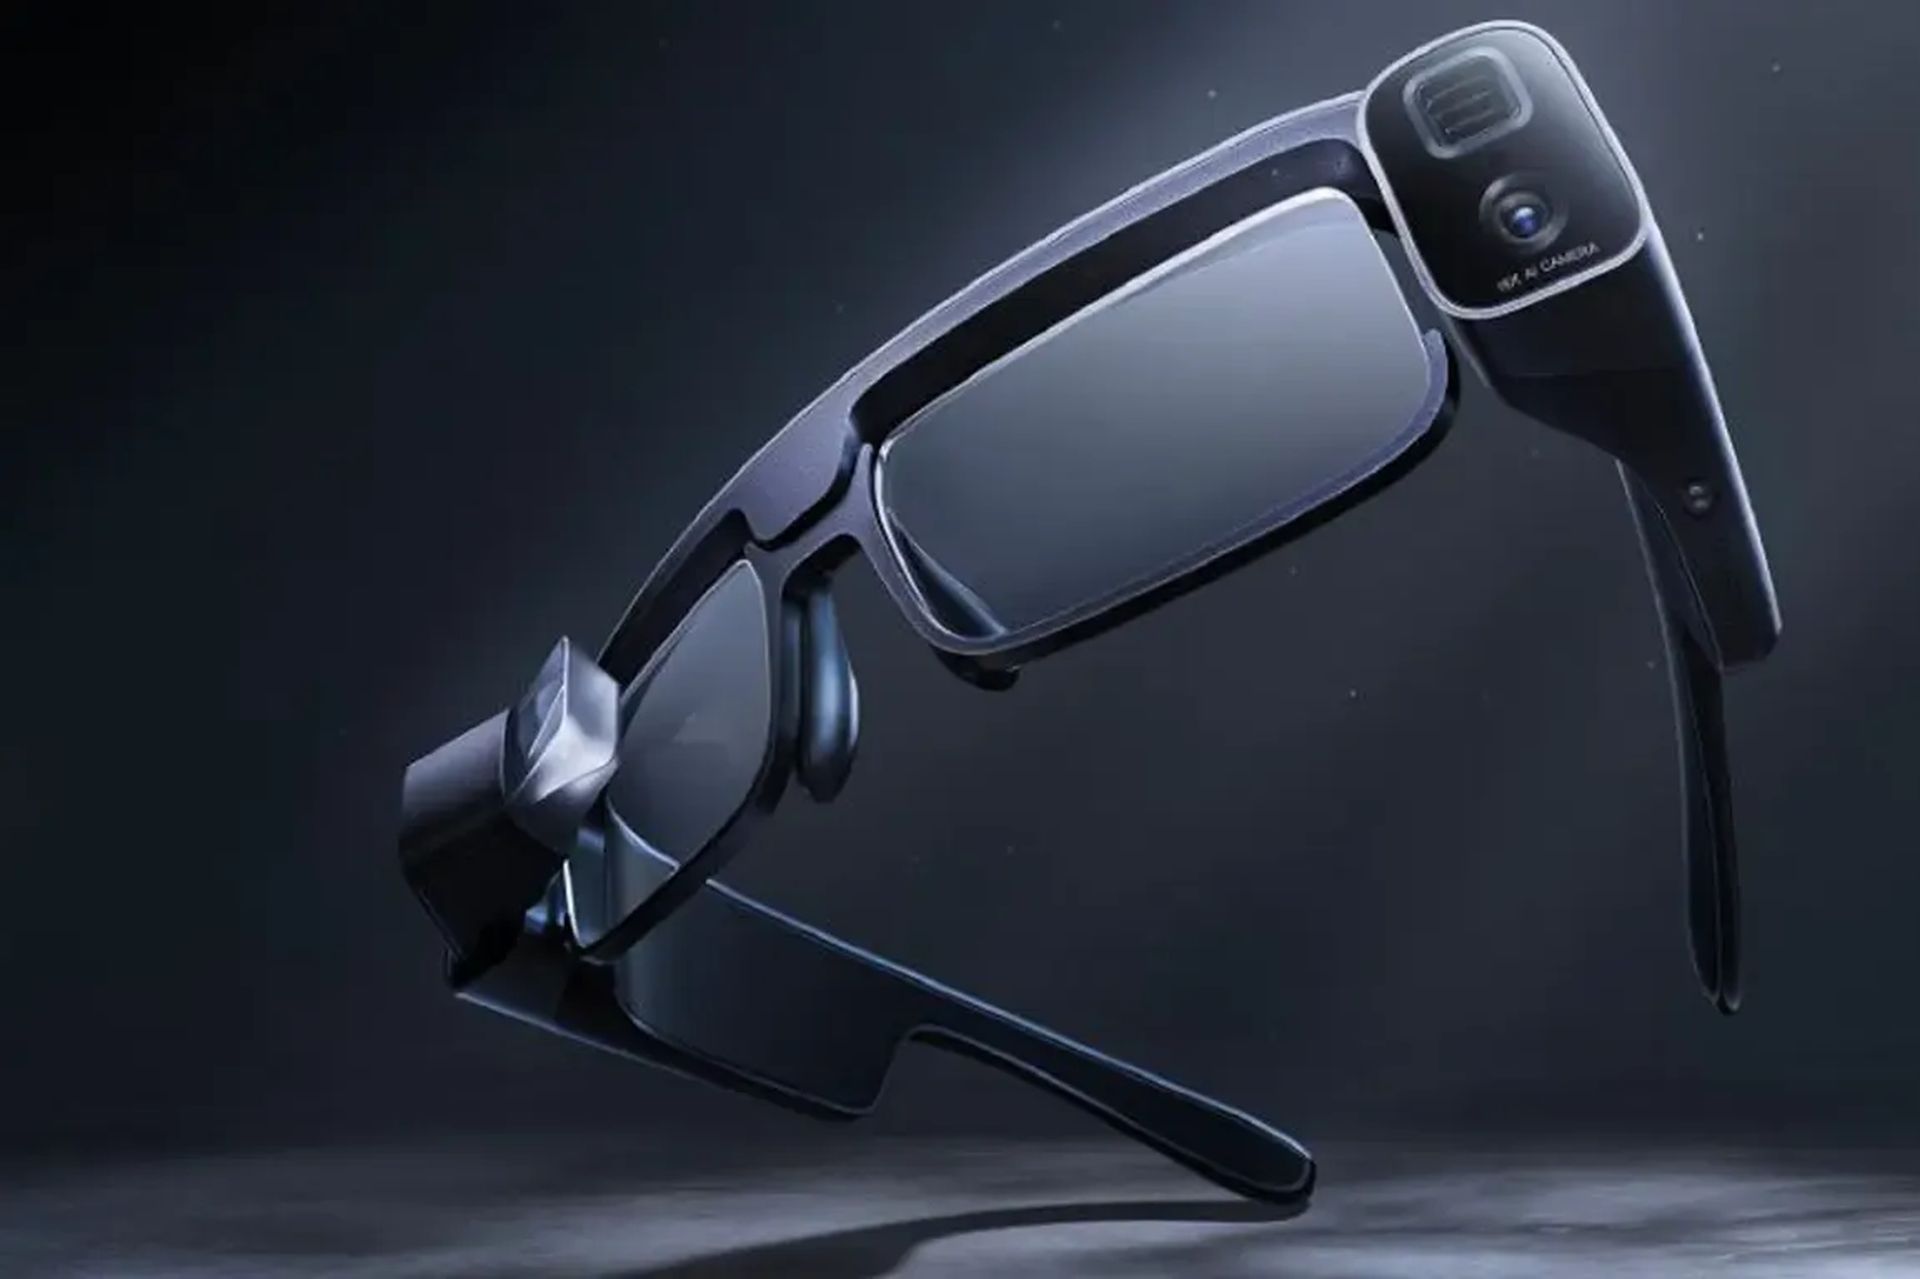 Today, we are going to be covering Xiaomi smart glasses Mijia's specs, price, and release date, so you can decide whether to buy it or not when it comes out.